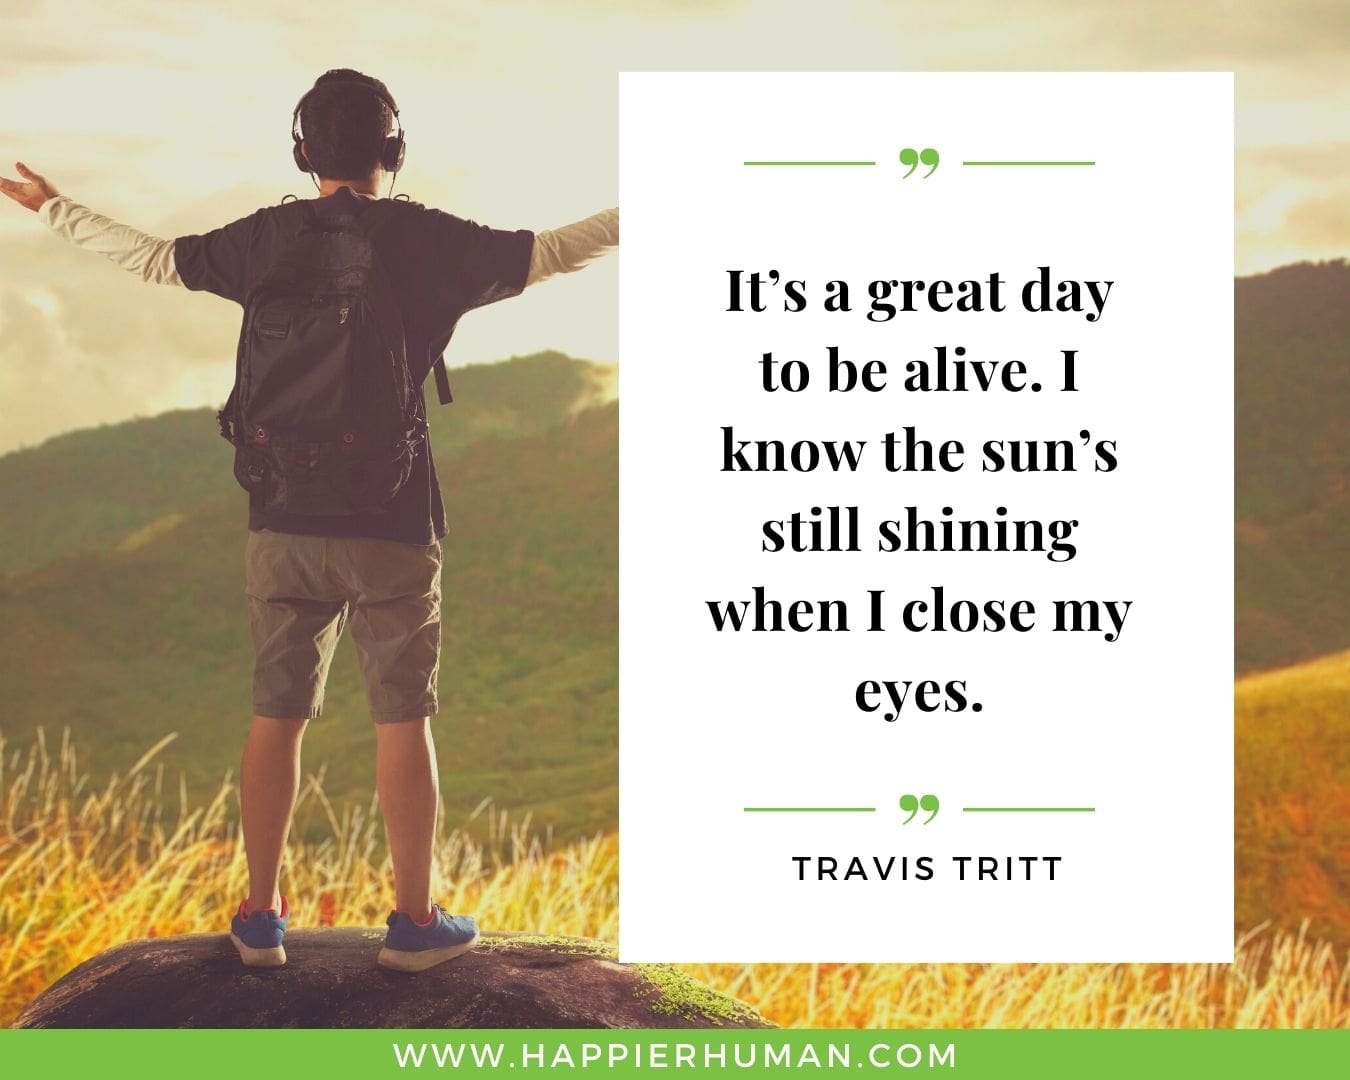 Great Day Quotes - “It’s a great day to be alive. I know the sun’s still shining when I close my eyes.” – Travis Tritt